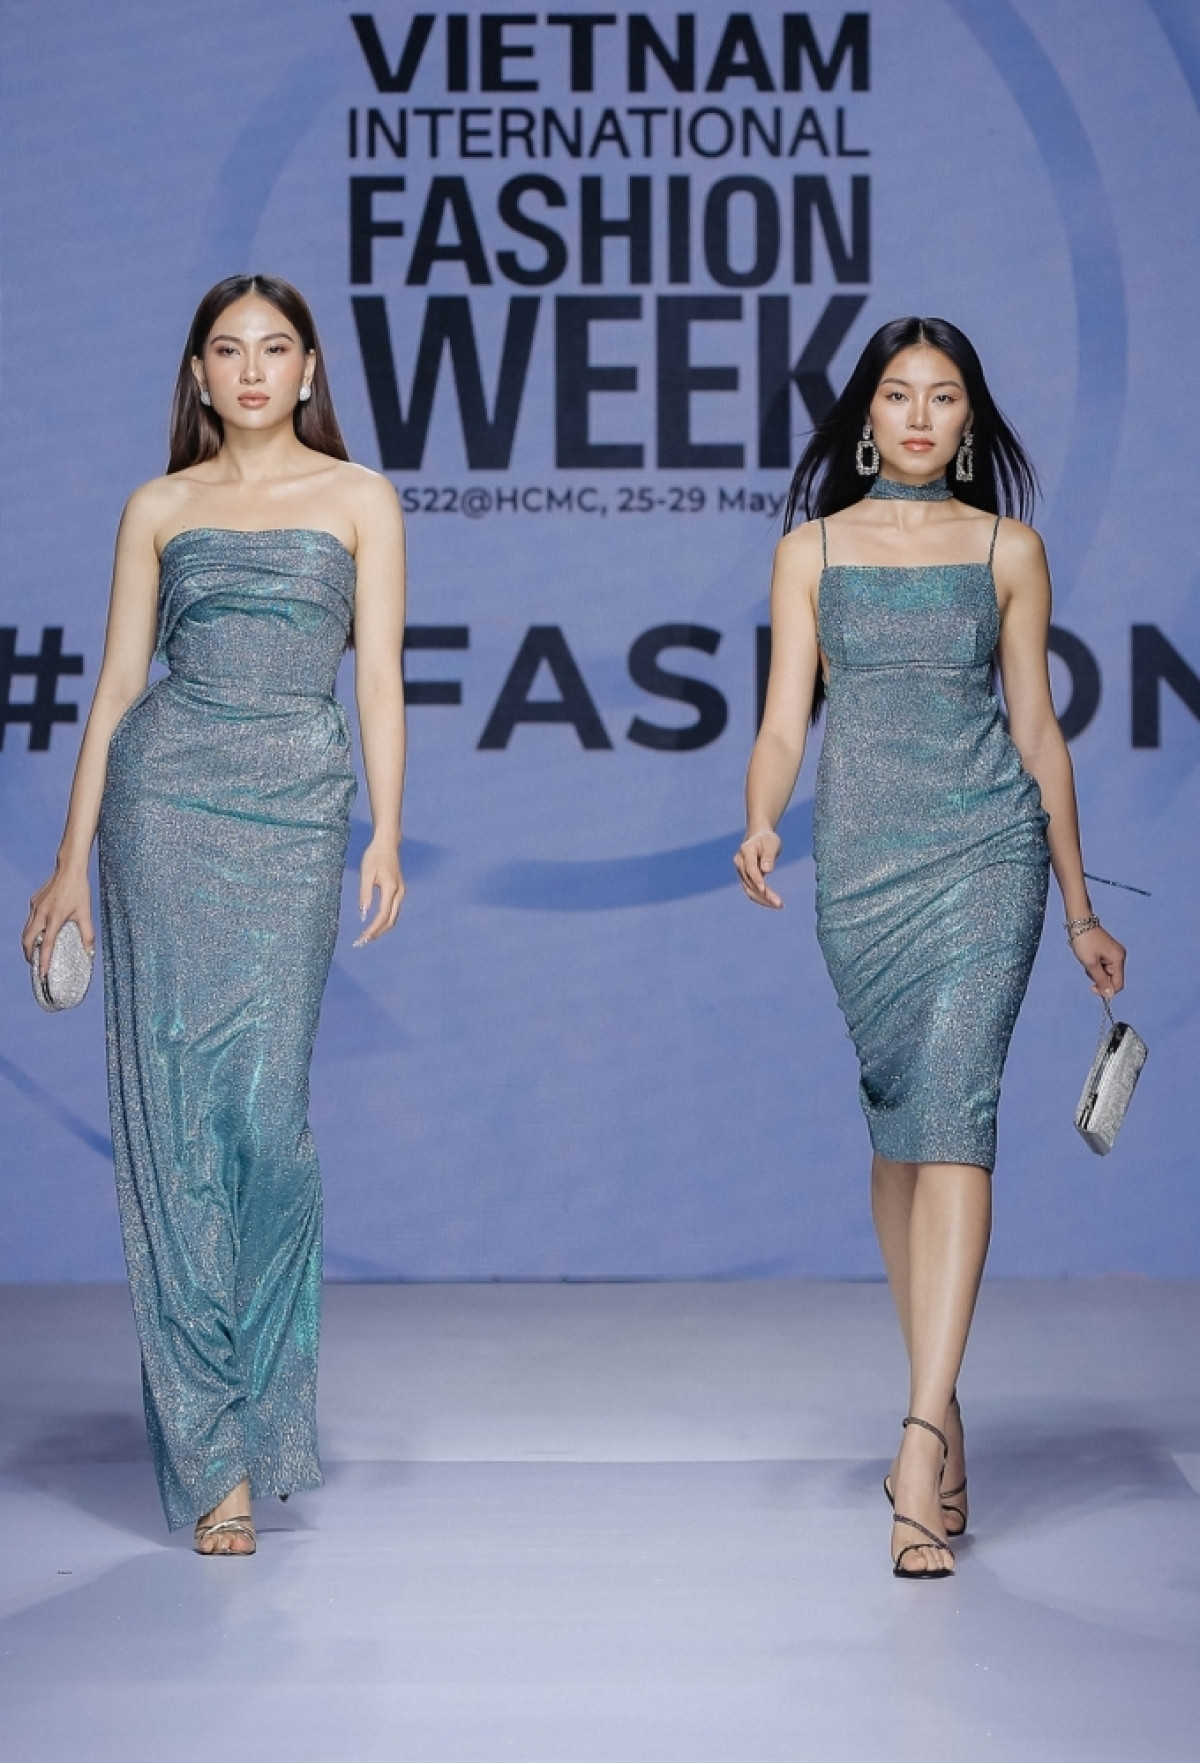 Two outfits by designer Hoang Minh Ha are introduced at the press conference in Ho Chi Minh City on May 9.